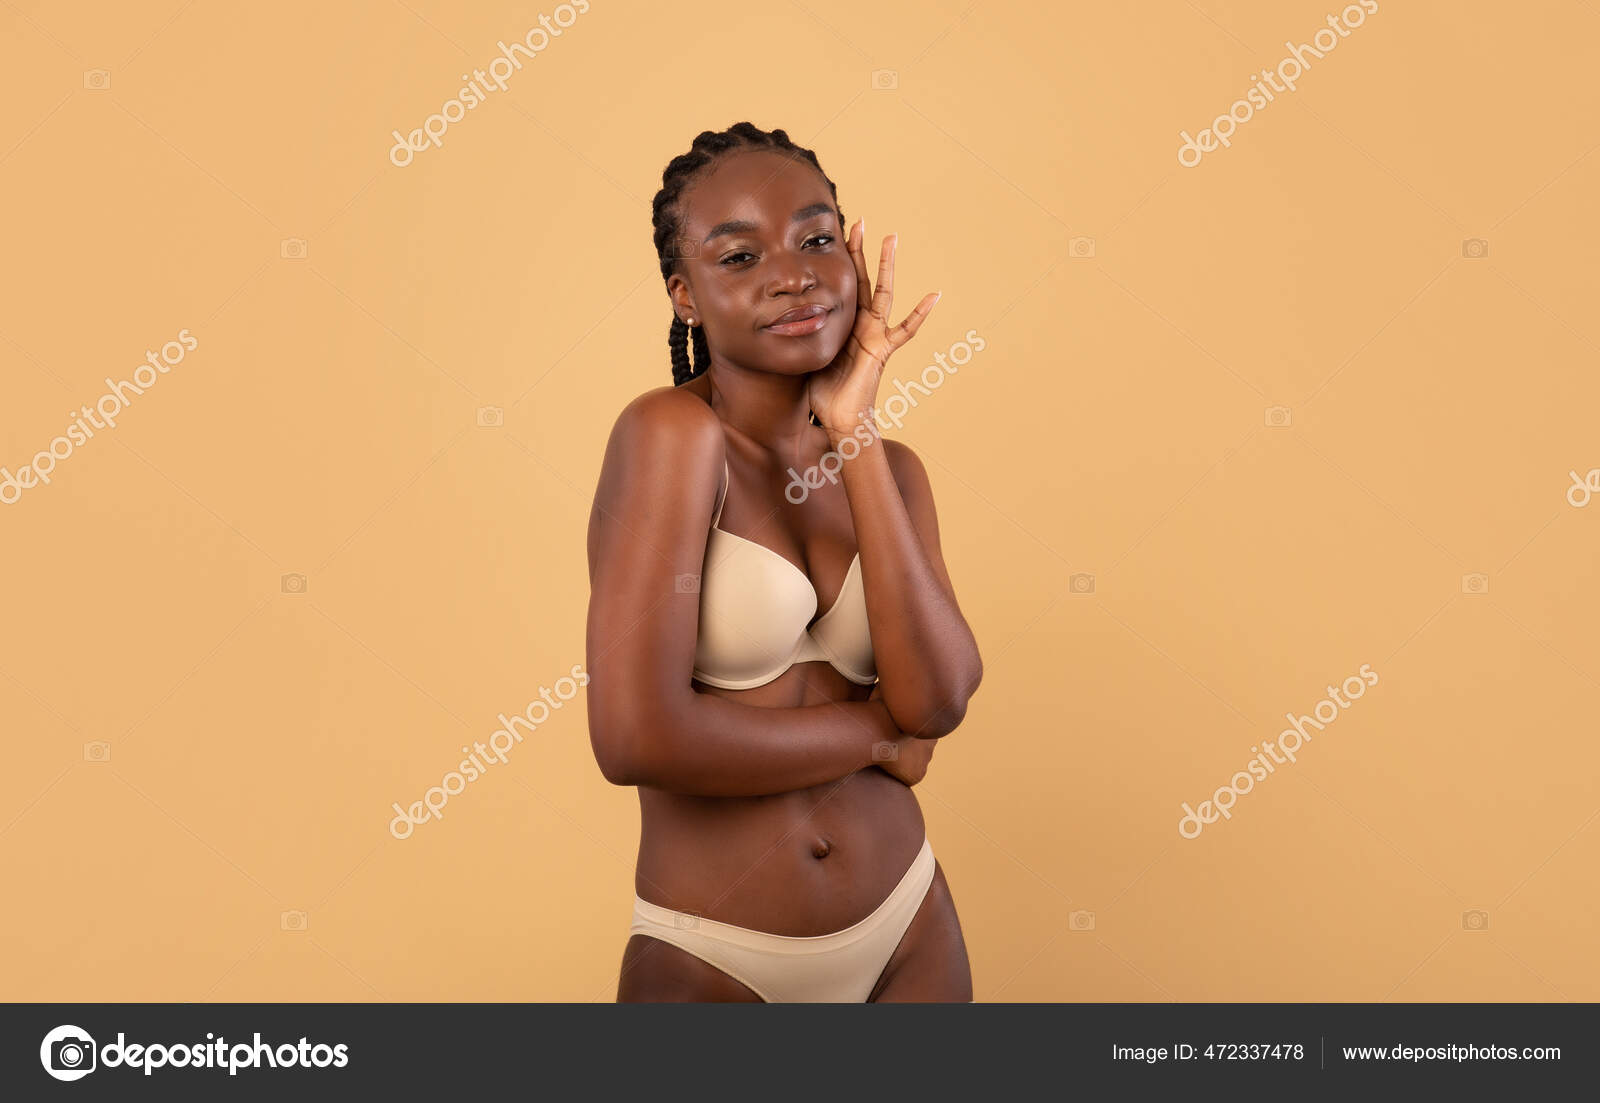 https://st2.depositphotos.com/4218696/47233/i/1600/depositphotos_472337478-stock-photo-attractive-african-woman-with-fit.jpg